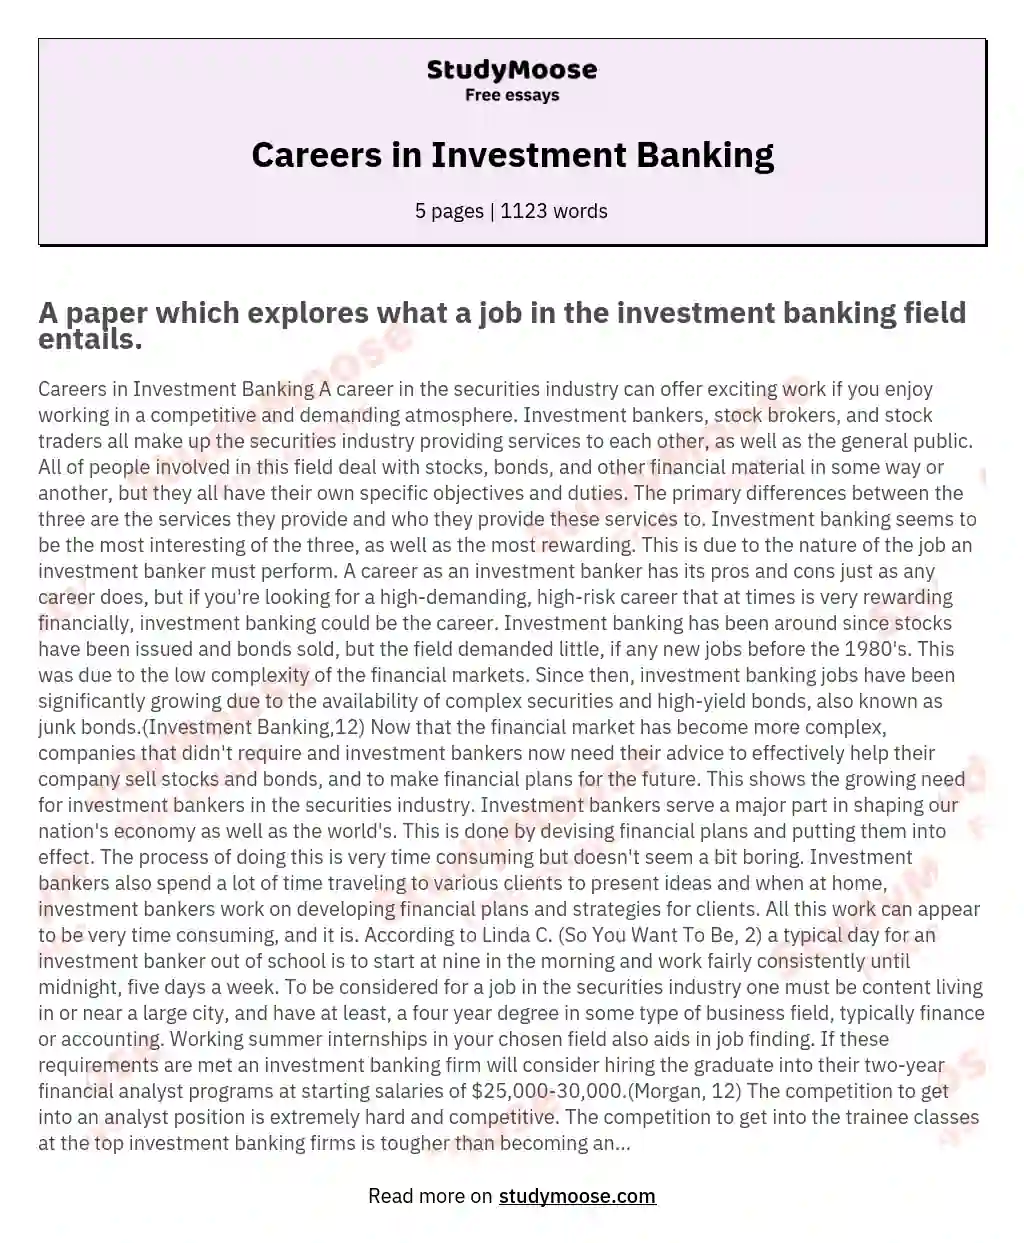 Careers in Investment Banking essay